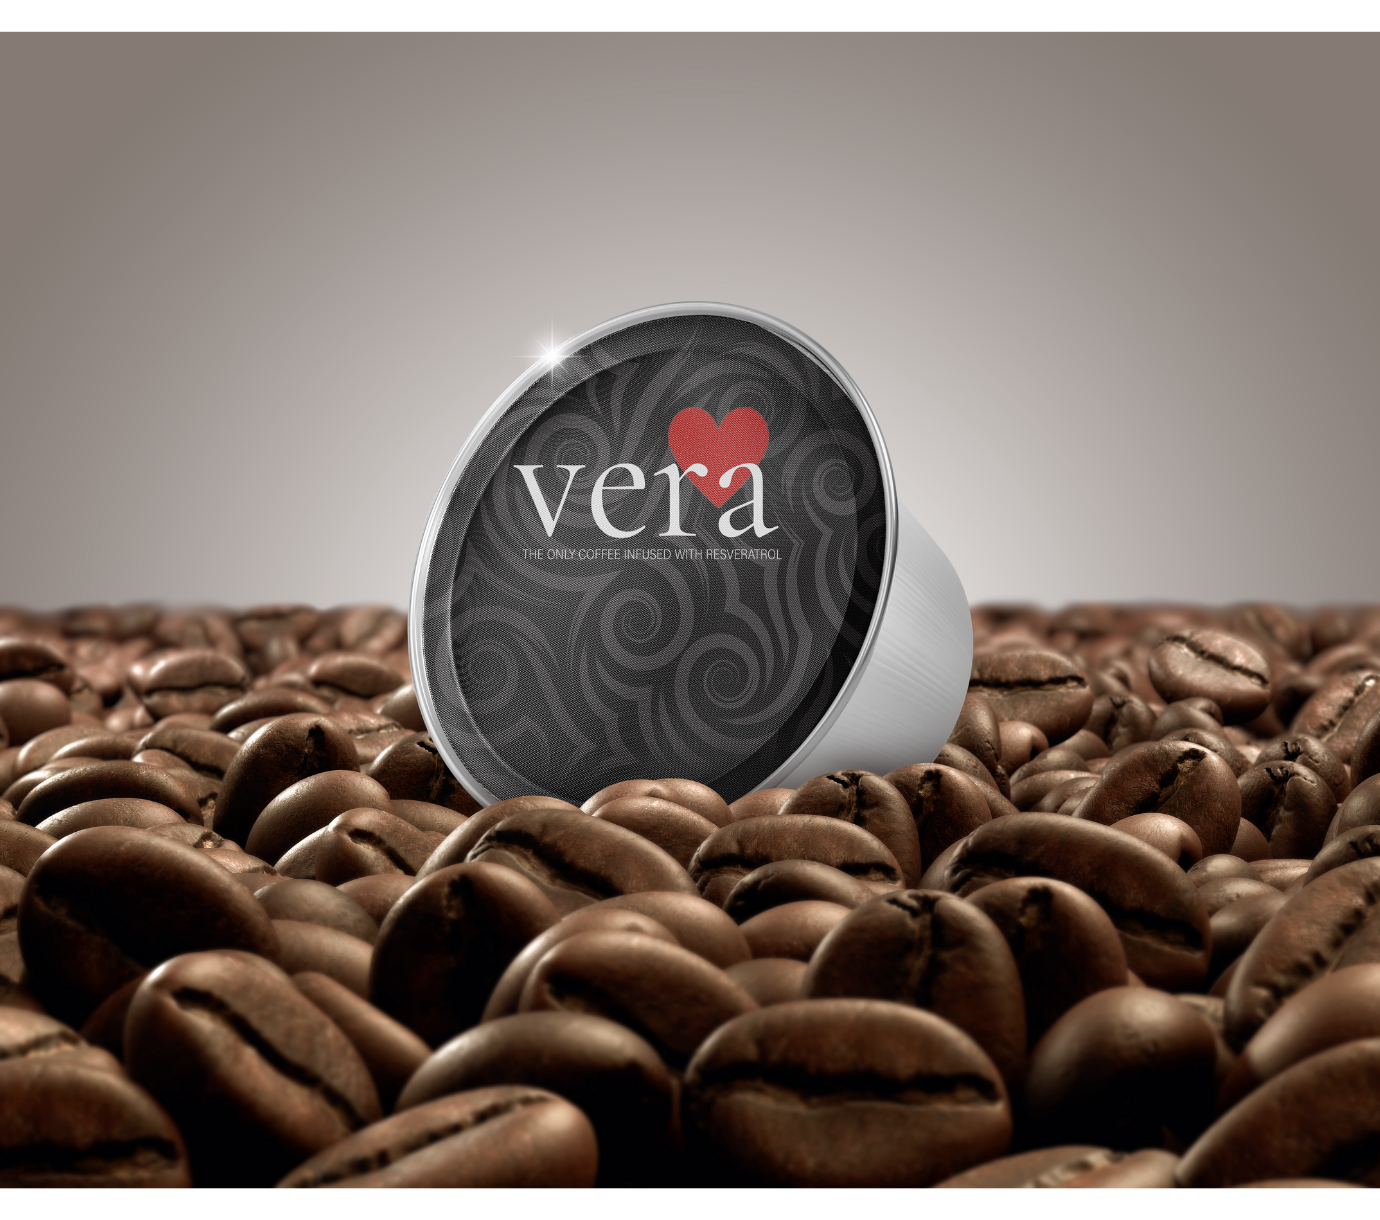 Vera roasting co, the only coffee infused with resveratrol, Dover, New Hampshire, NH, coffee, health benefits, shop local, NH made, ice coffee, cold brew, calm blend, immunity blend, cardio blend